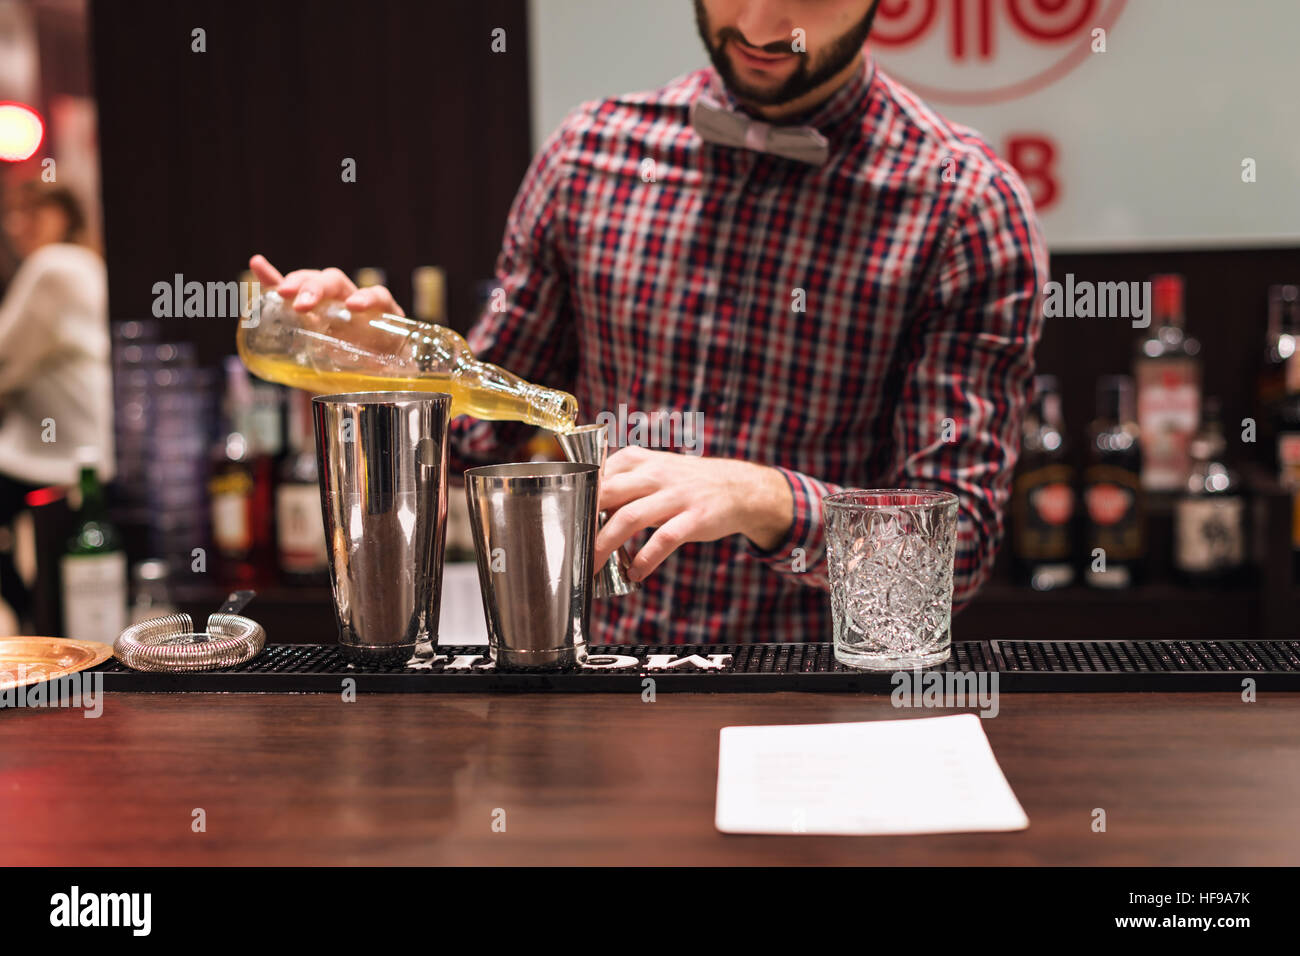 Kyiv, Ukraine - 30 october, 2016: Barman festival. Young handsome bartender is making cocktail. Stock Photo